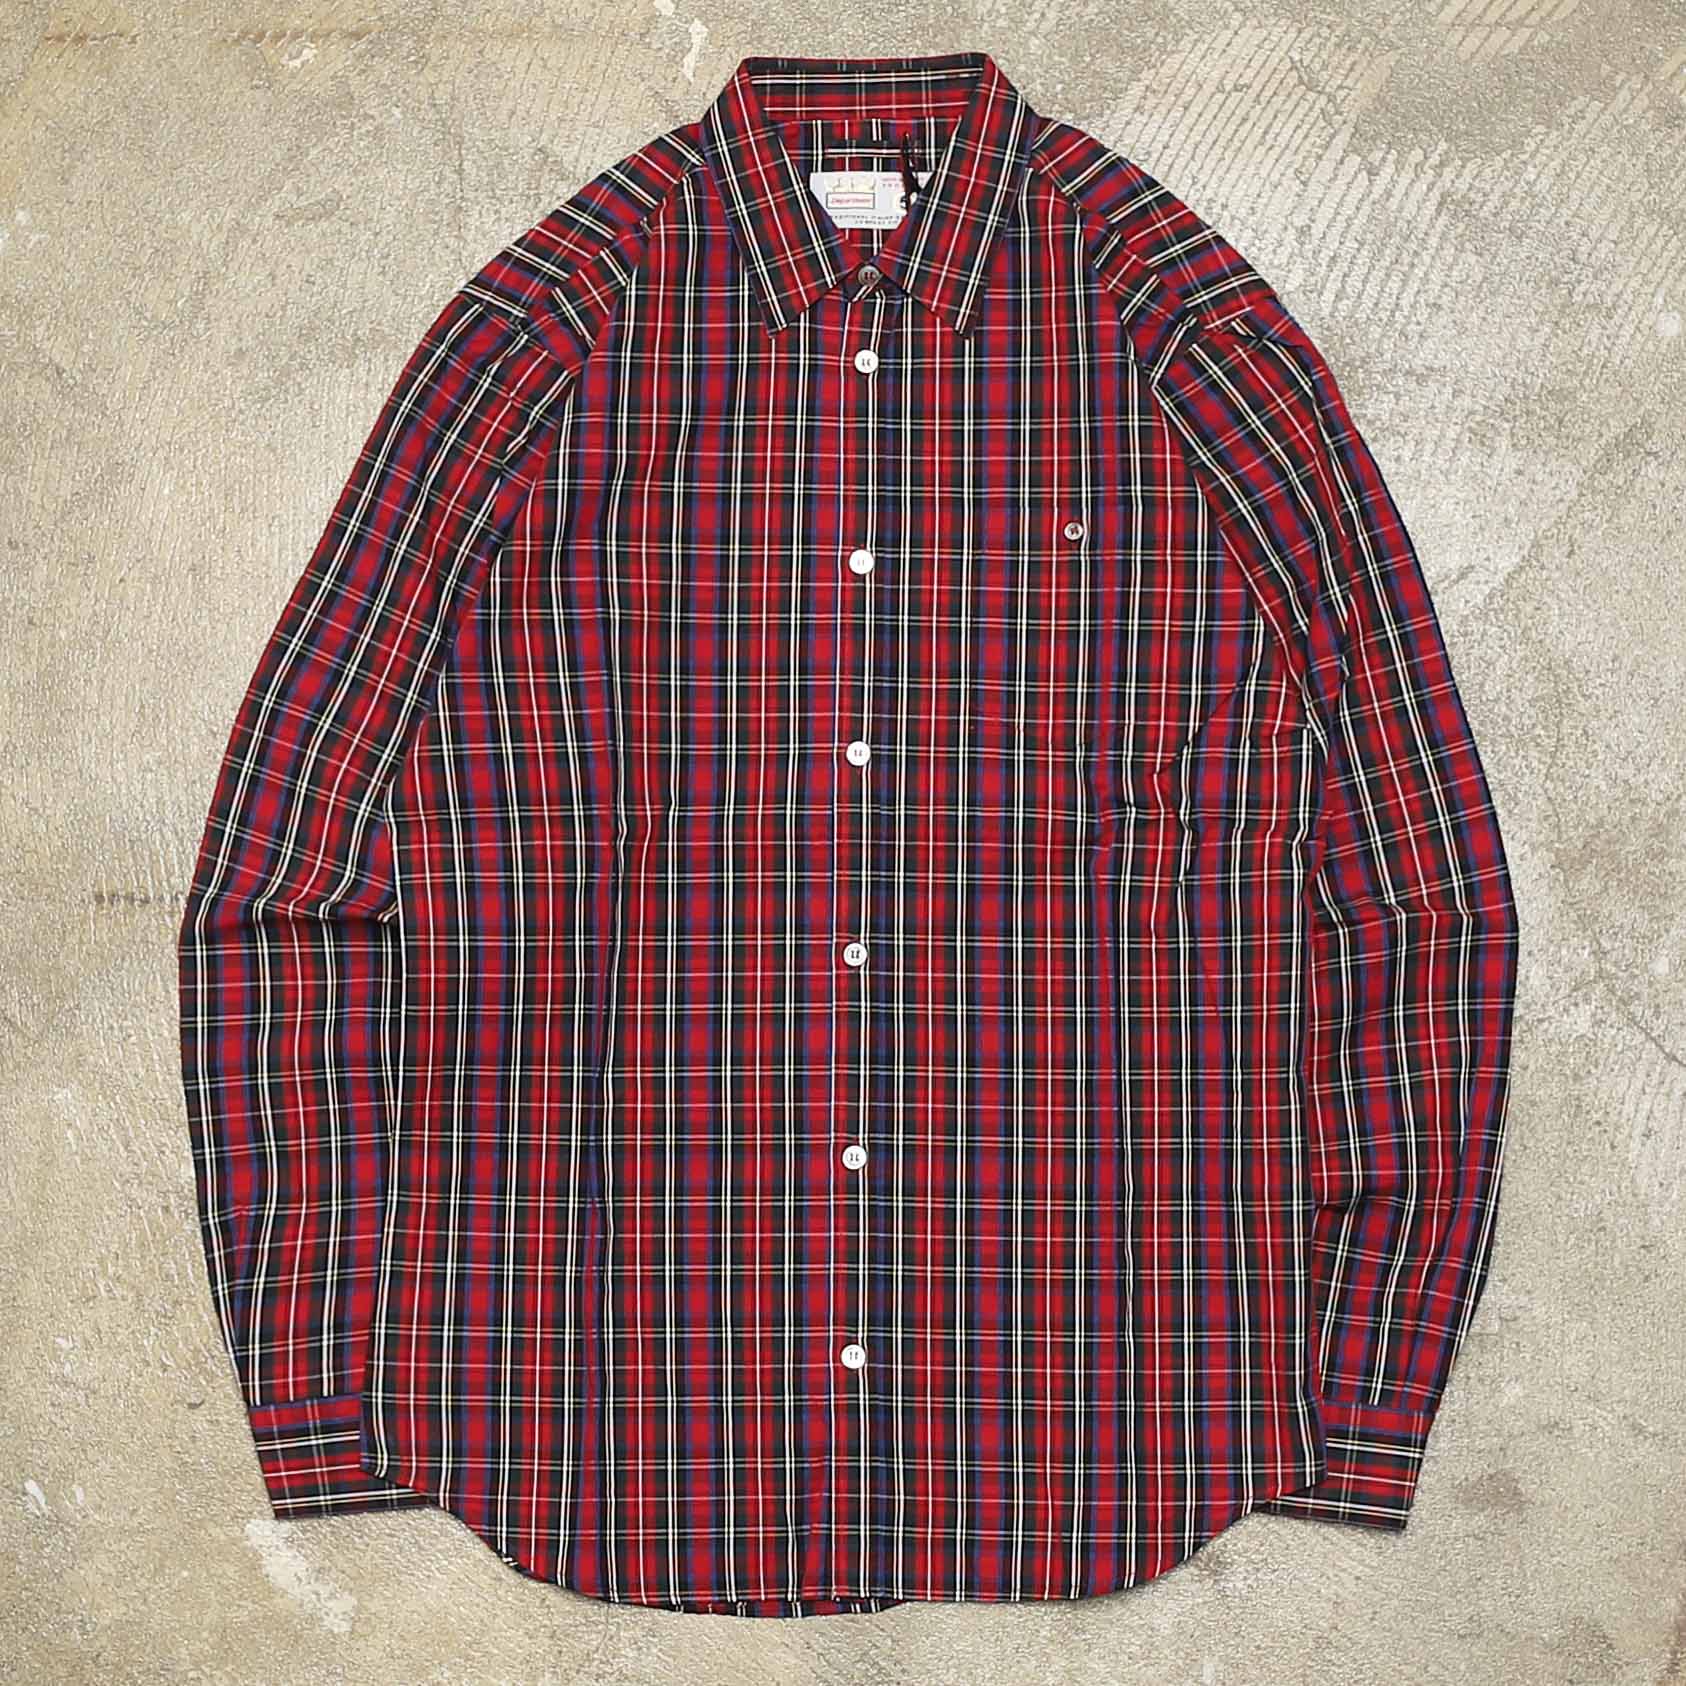 DEPARTMENT 5 MULTI CHECK SHIRTS - RED